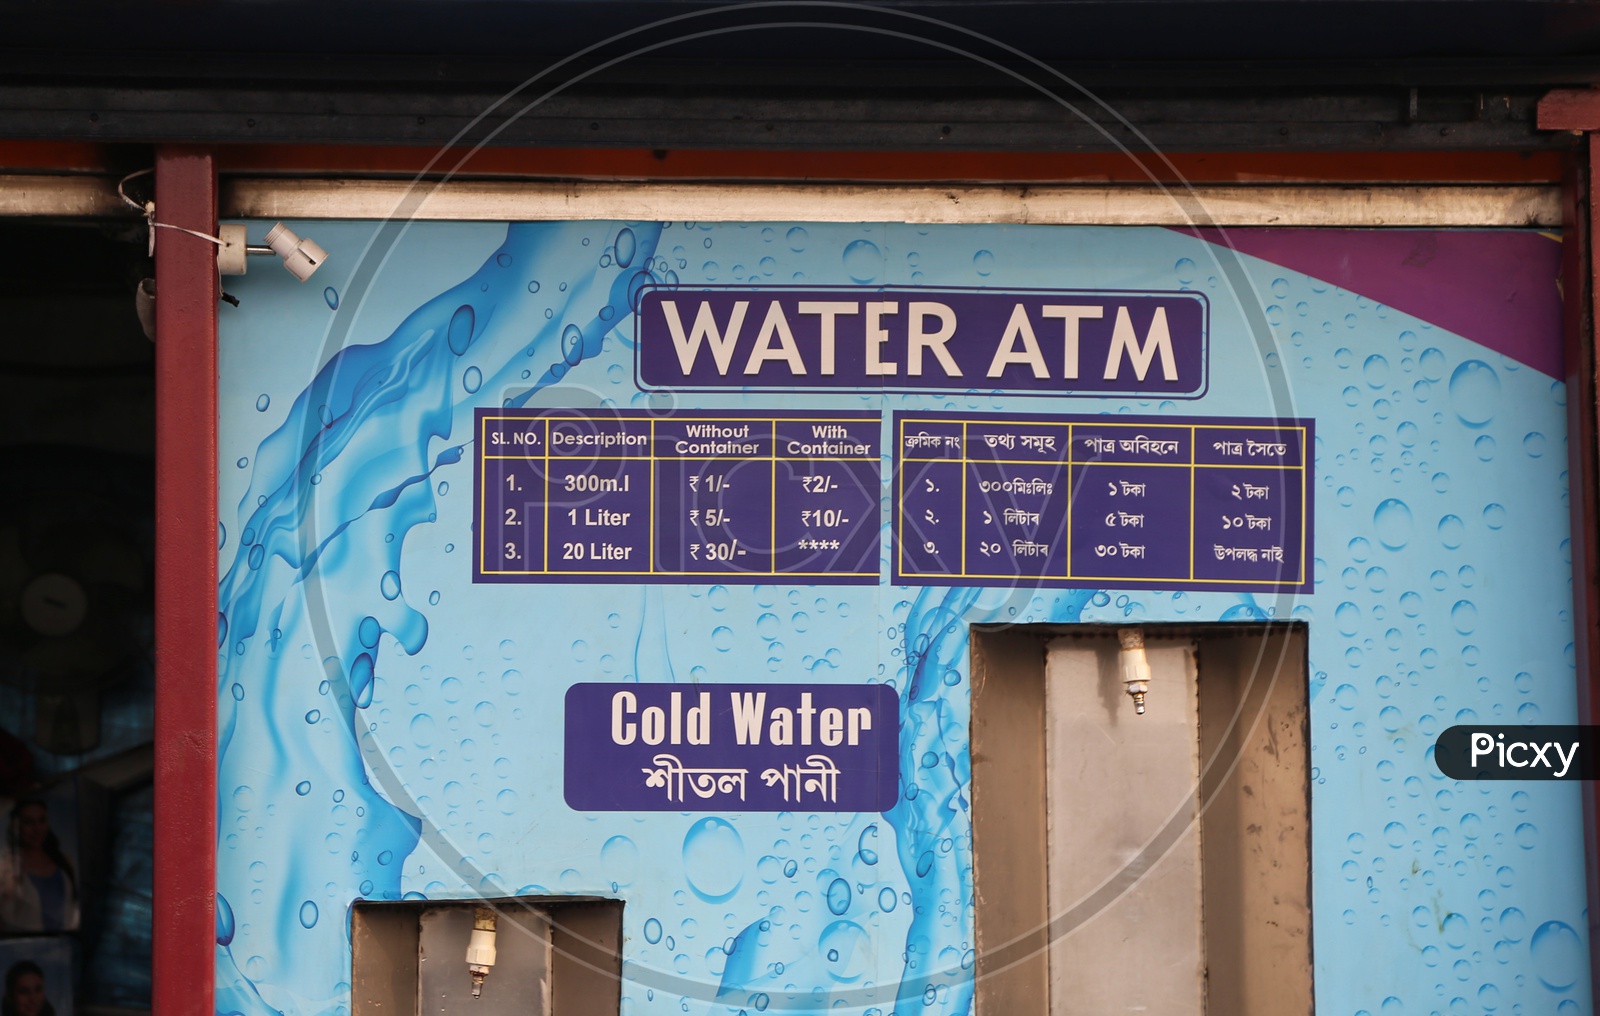 Water atm